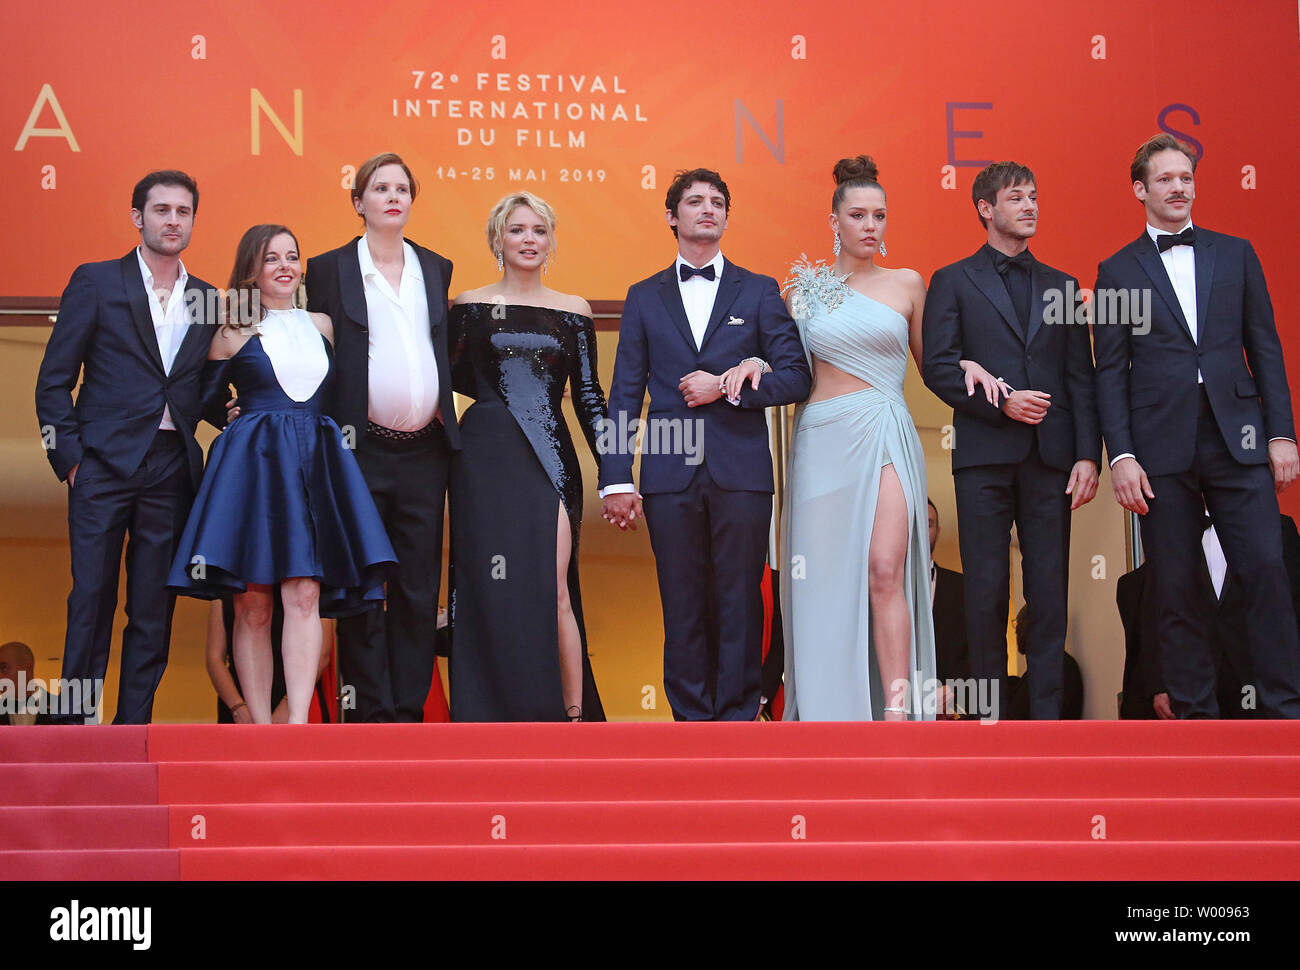 (From L to R)  Arthur Harari, Laure Calamy, Justine Triet, Virginie Efira, Niels Schneider, Adele Exarchopoulos, Gaspard Ulliel and Paul Hamy arrive on the red carpet before the screening of the film 'Sybil' at the 72nd annual Cannes International Film Festival in Cannes, France on May 24, 2019.  Photo by David Silpa/UPI Stock Photo